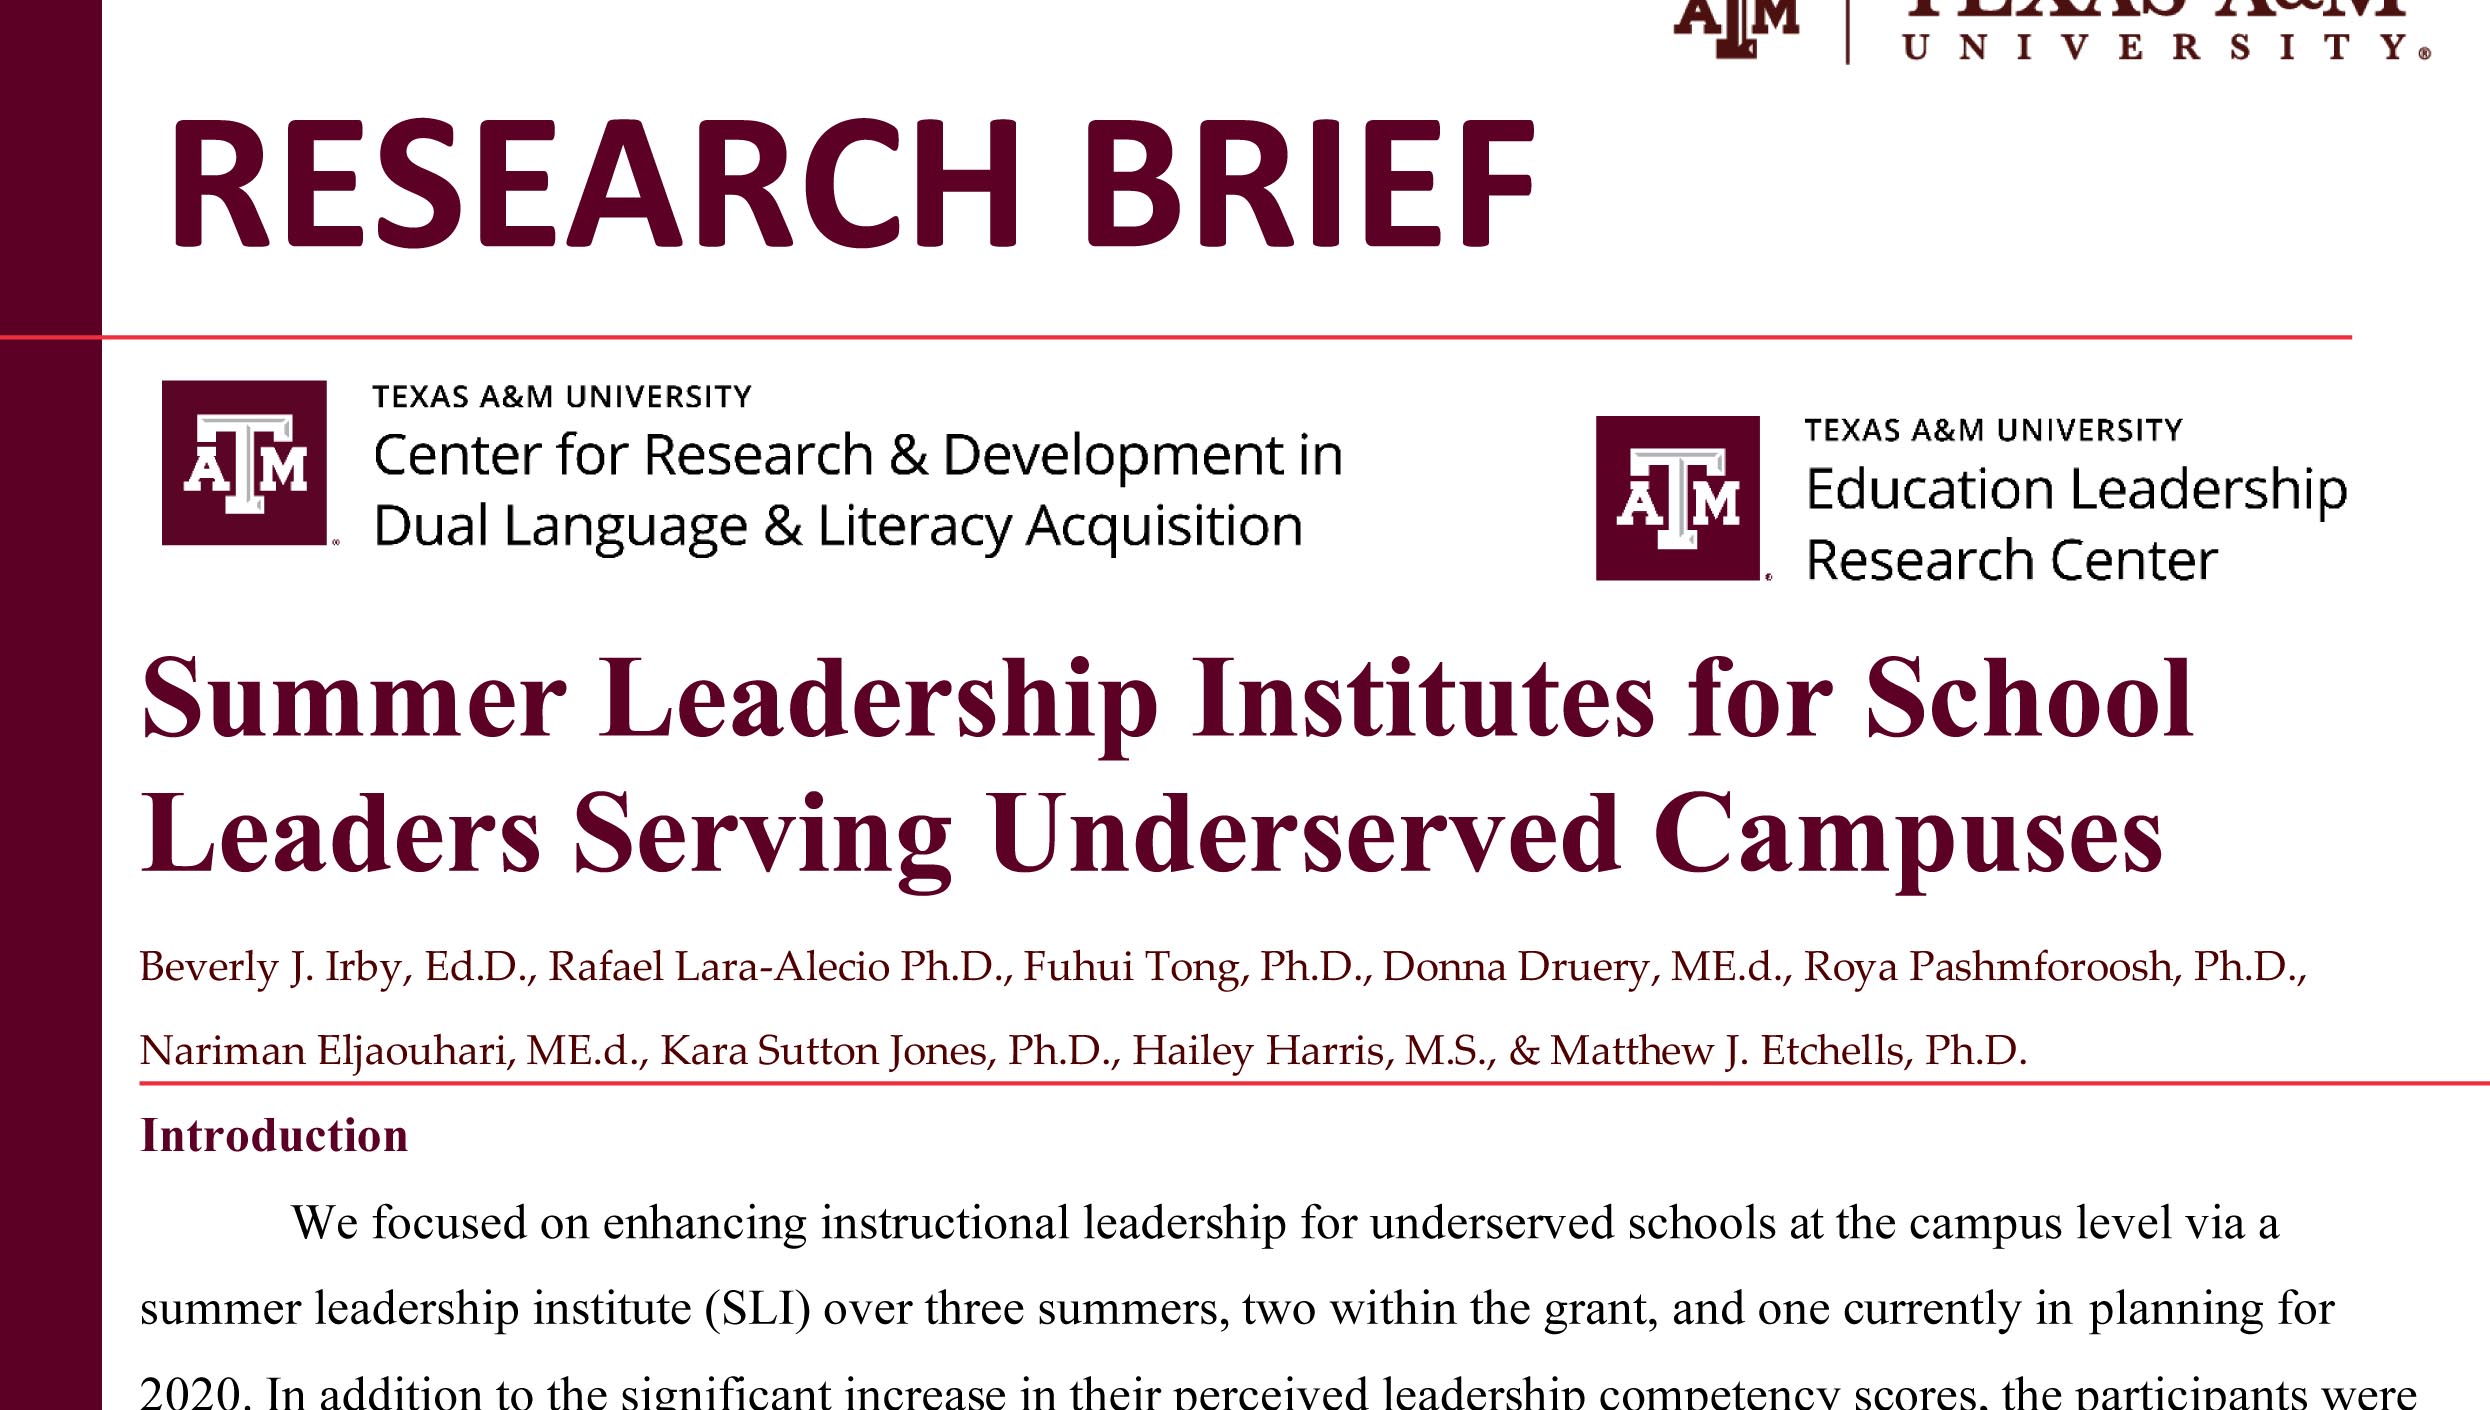 Research brief on Summer Leadership Institutes